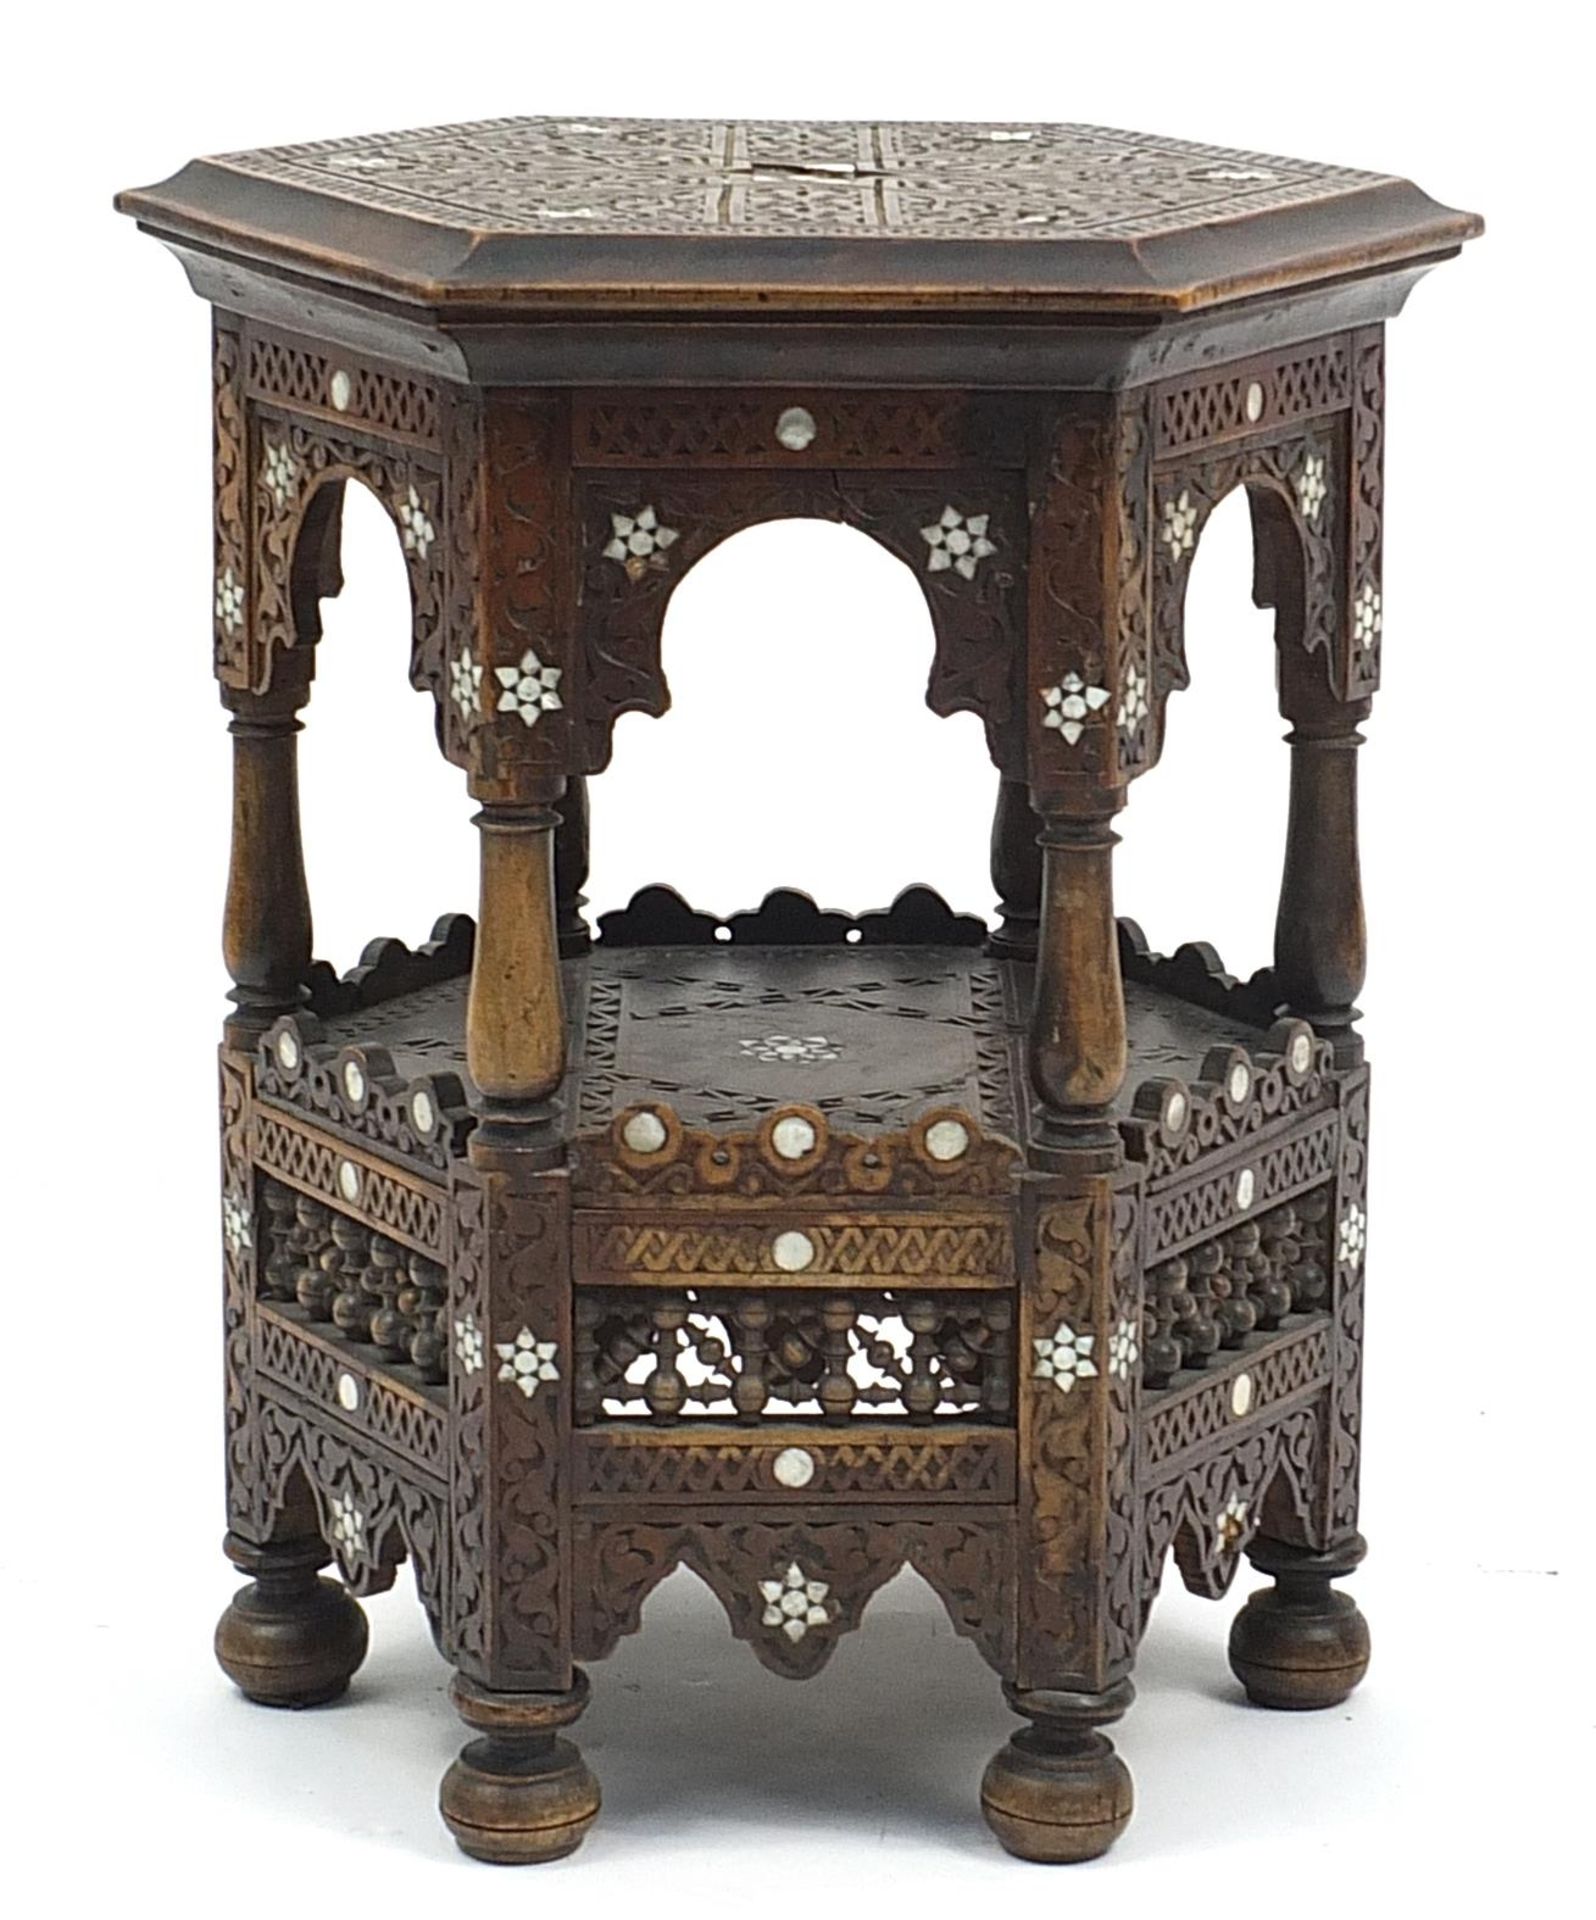 Manner of Liberty & Co, Moorish hexagonal occasional table with mother of pearl inlay, carved with